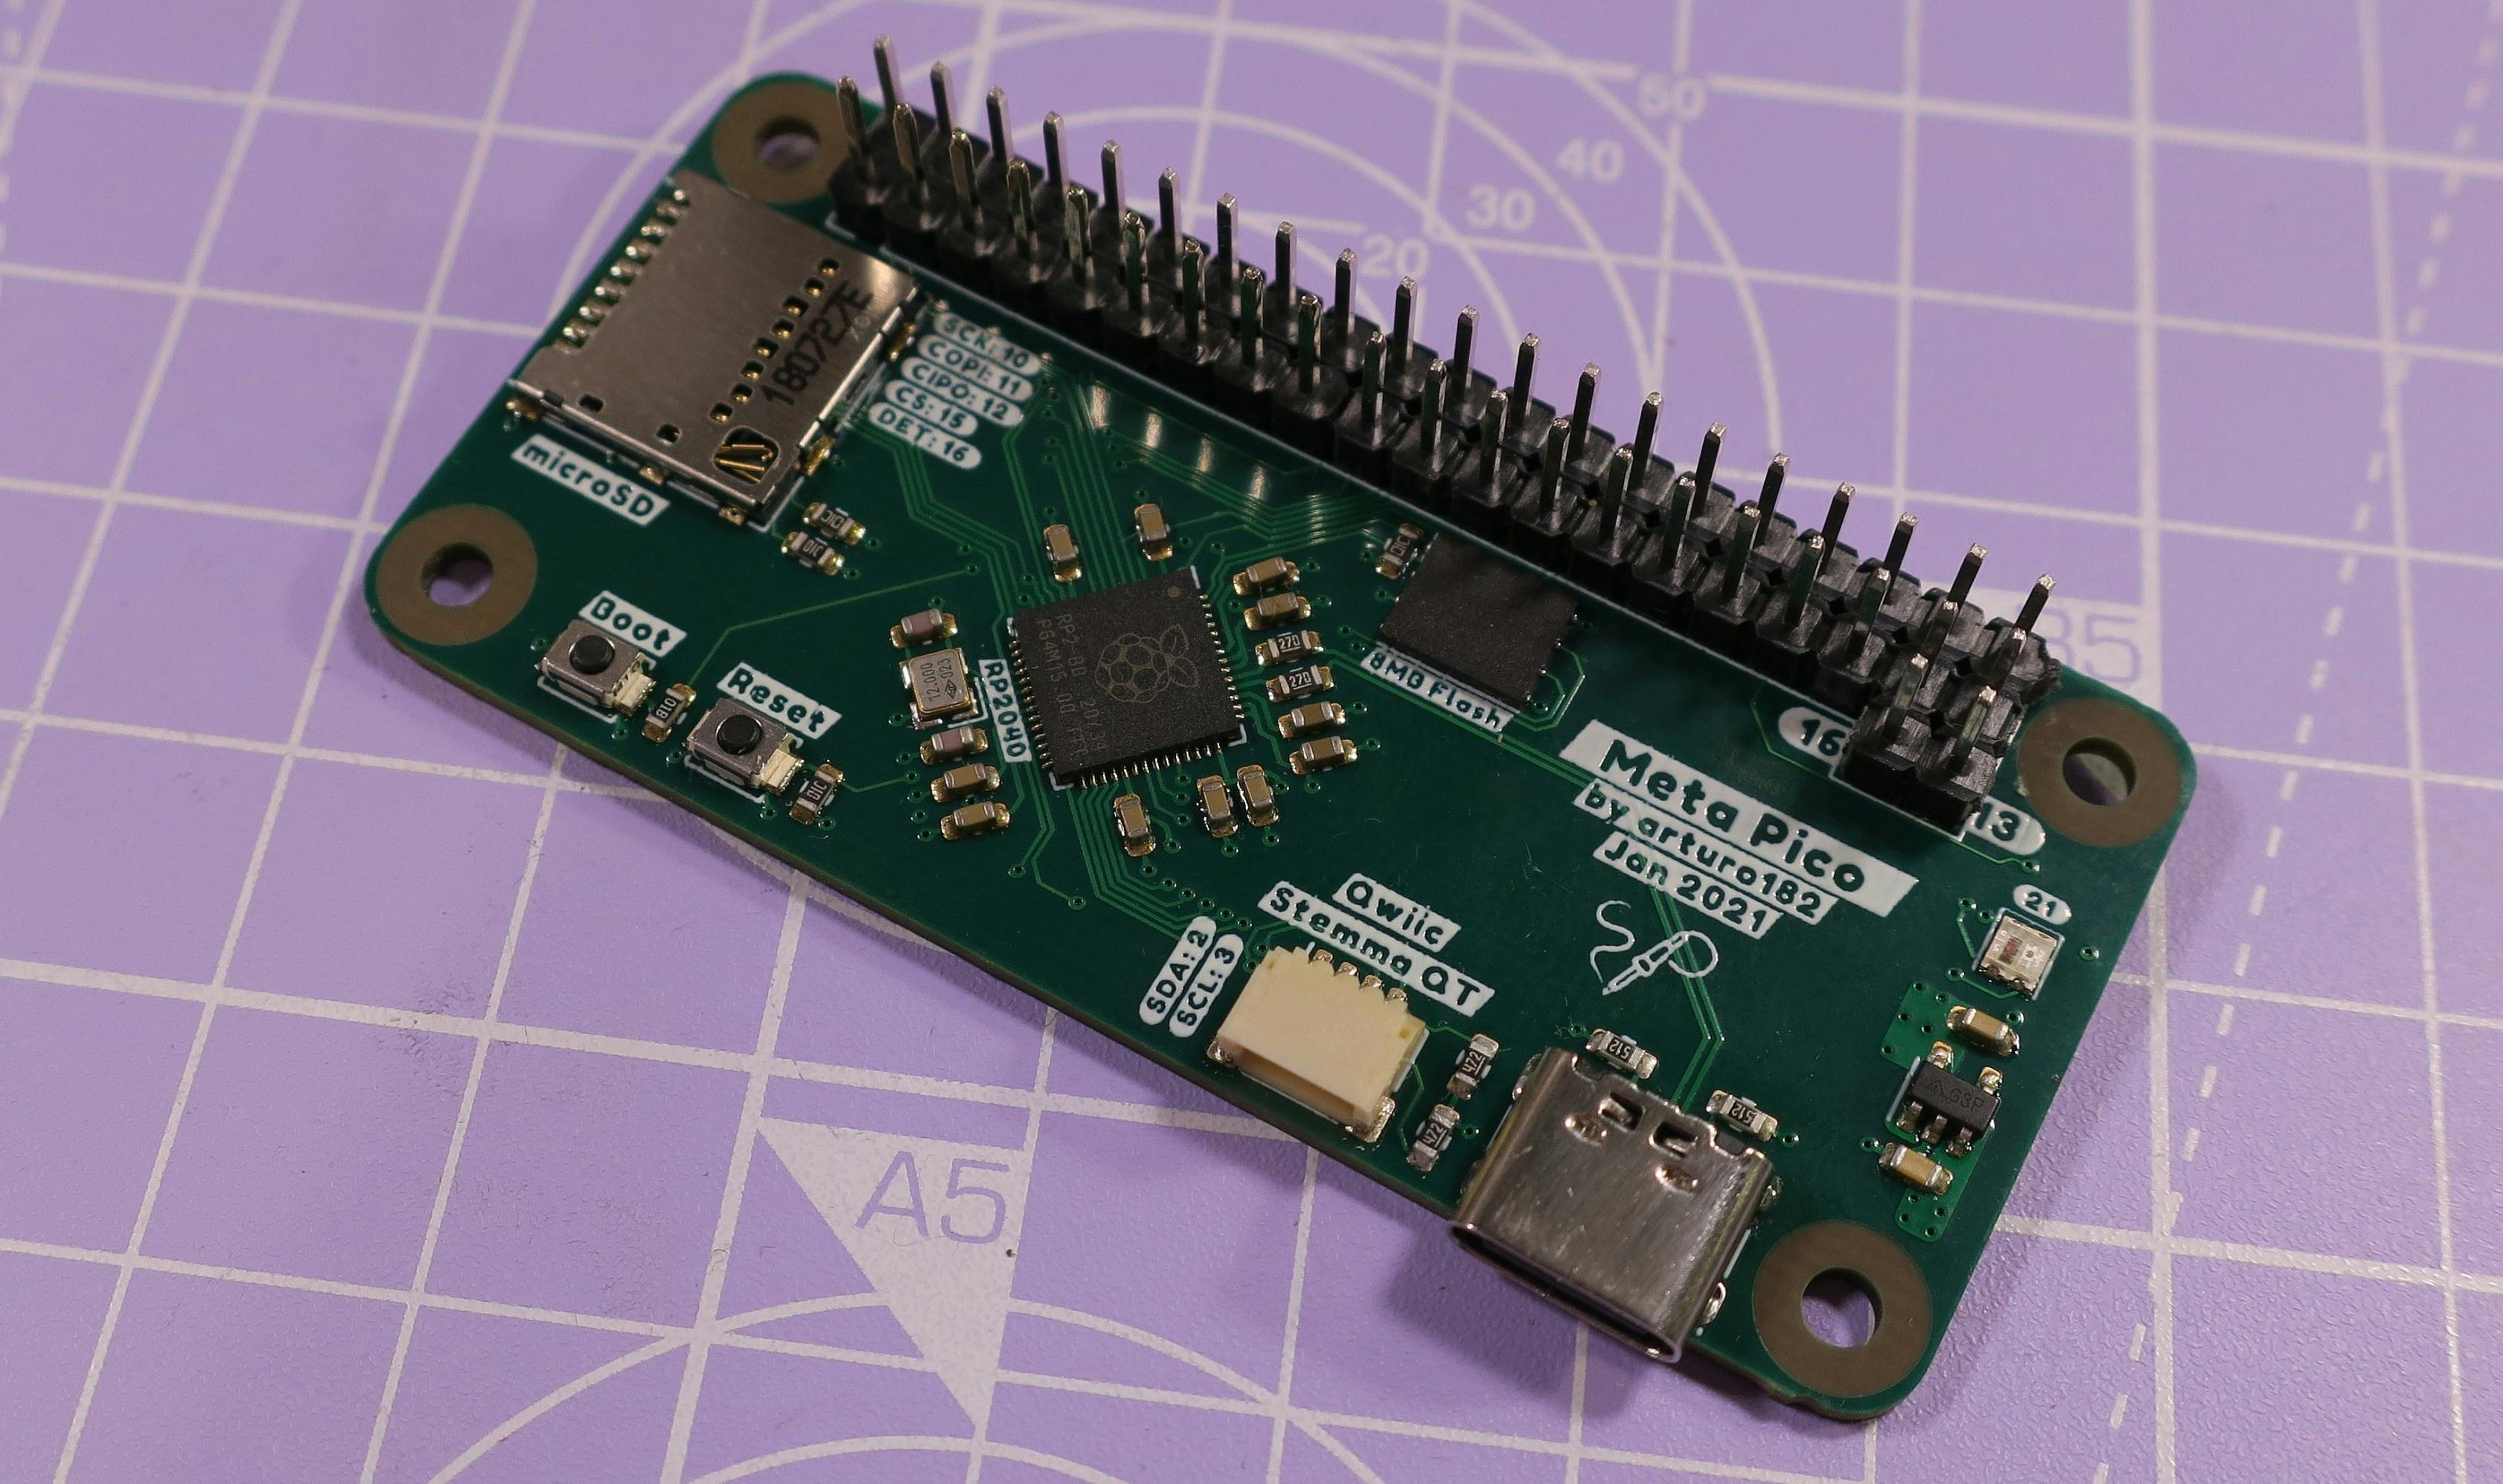 Design and Build Your Own Custom RP2040 Dev Board - Embedded Computing  Design